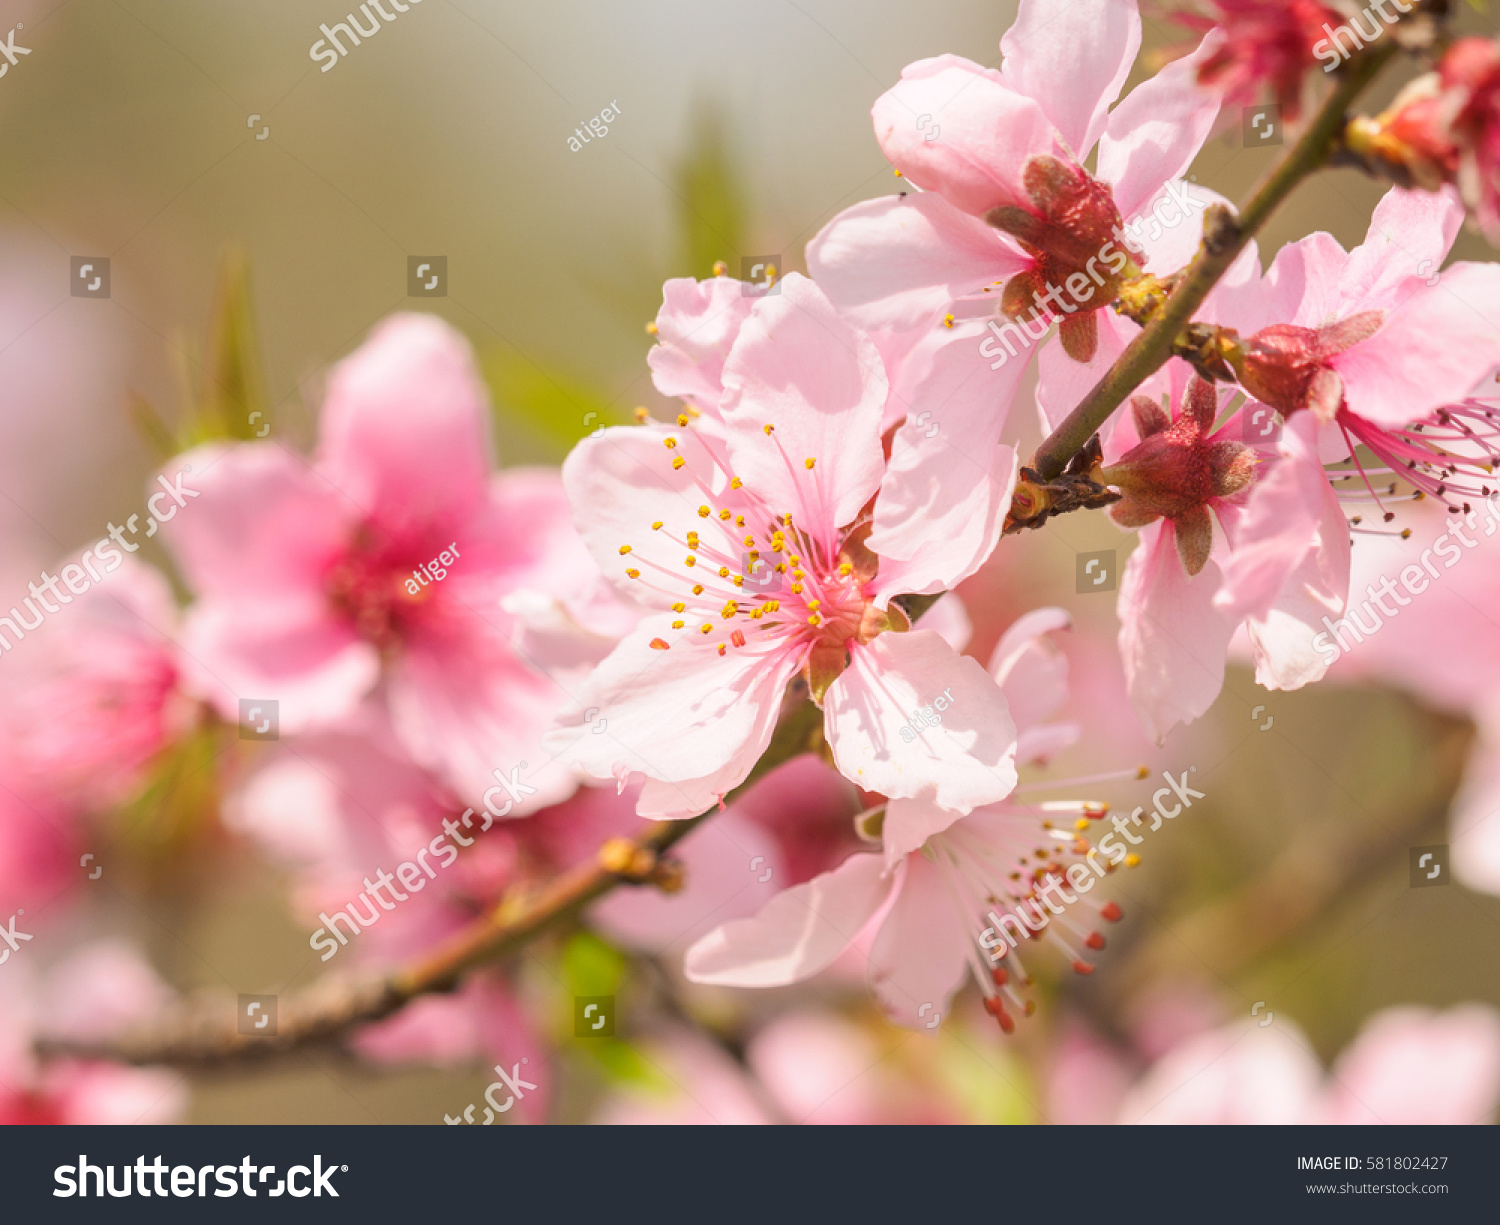 Spring flowers series, macro of beautiful peach blossoms with nature blurred background, focused on the stamen. #581802427